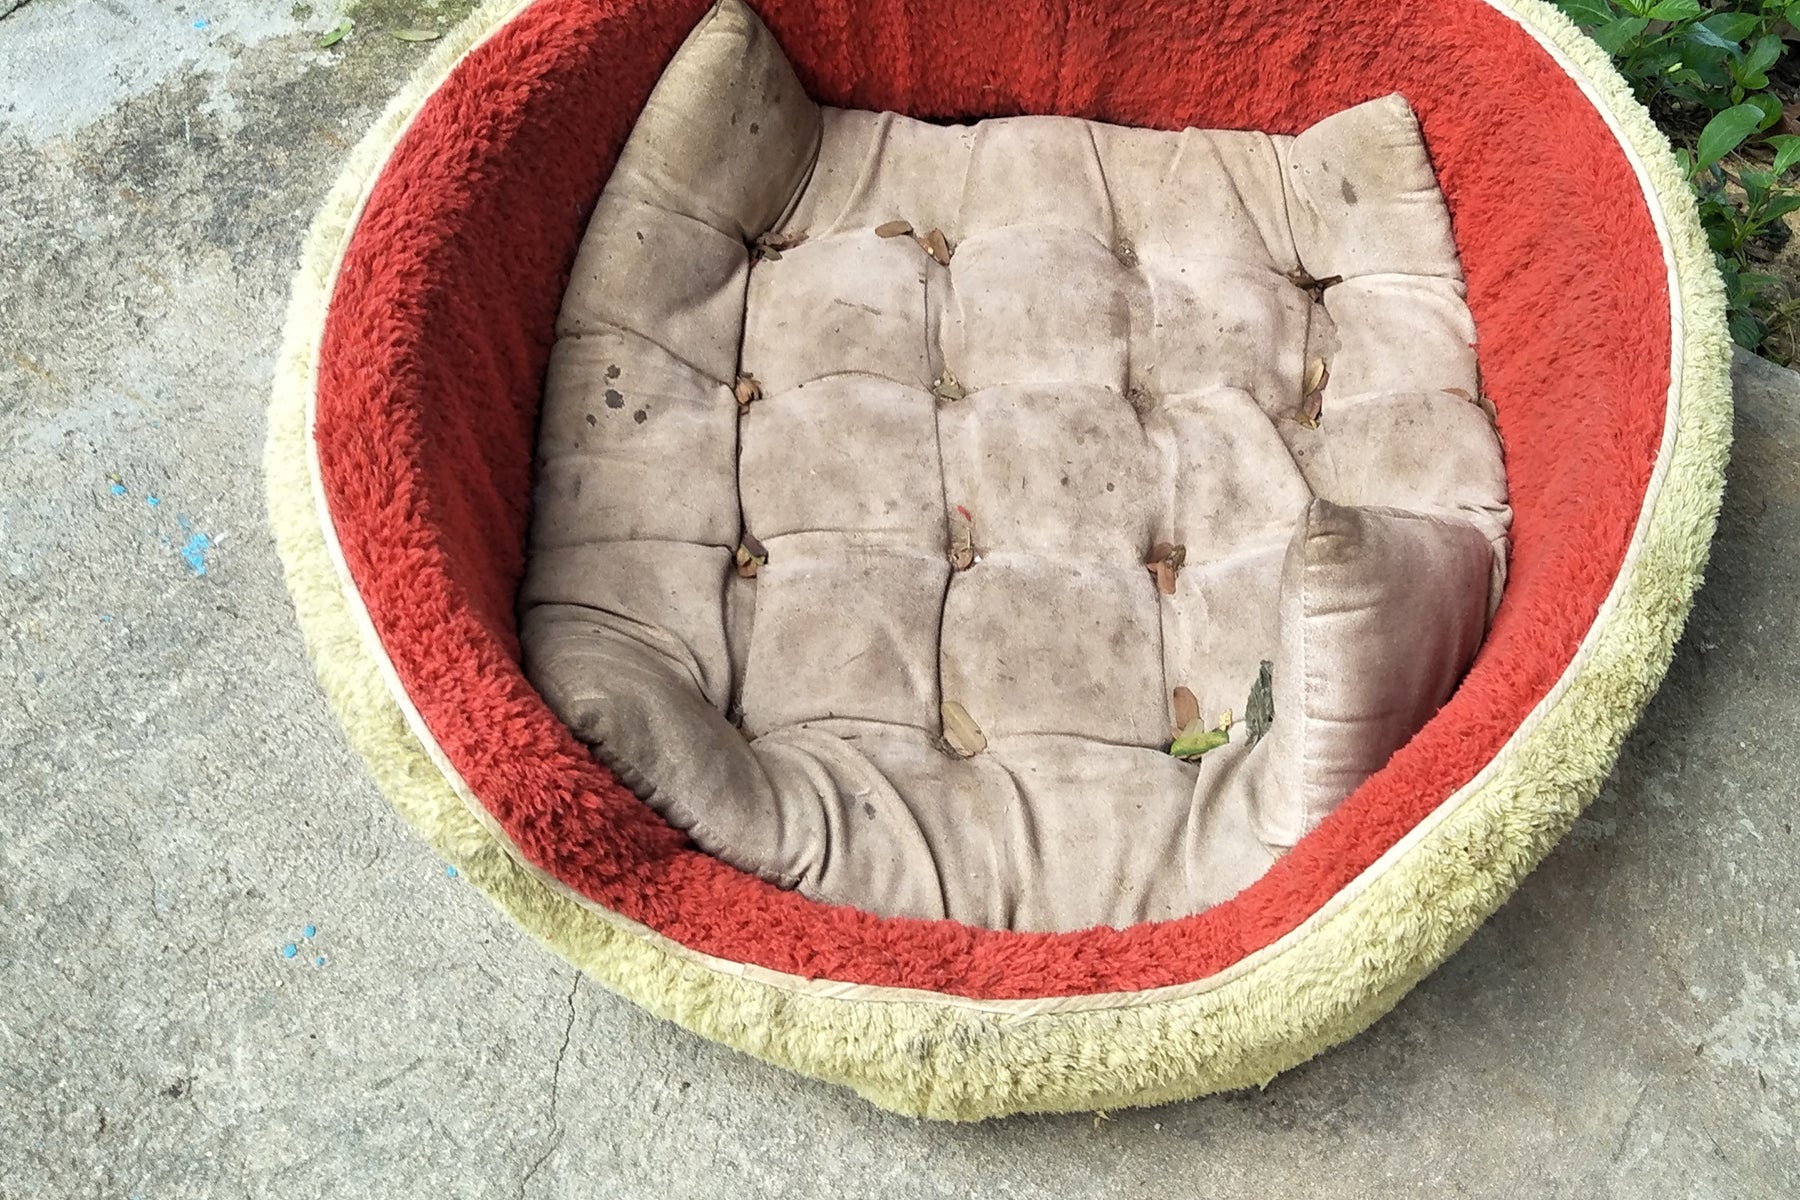 Six signs your dog's bed needs replacing